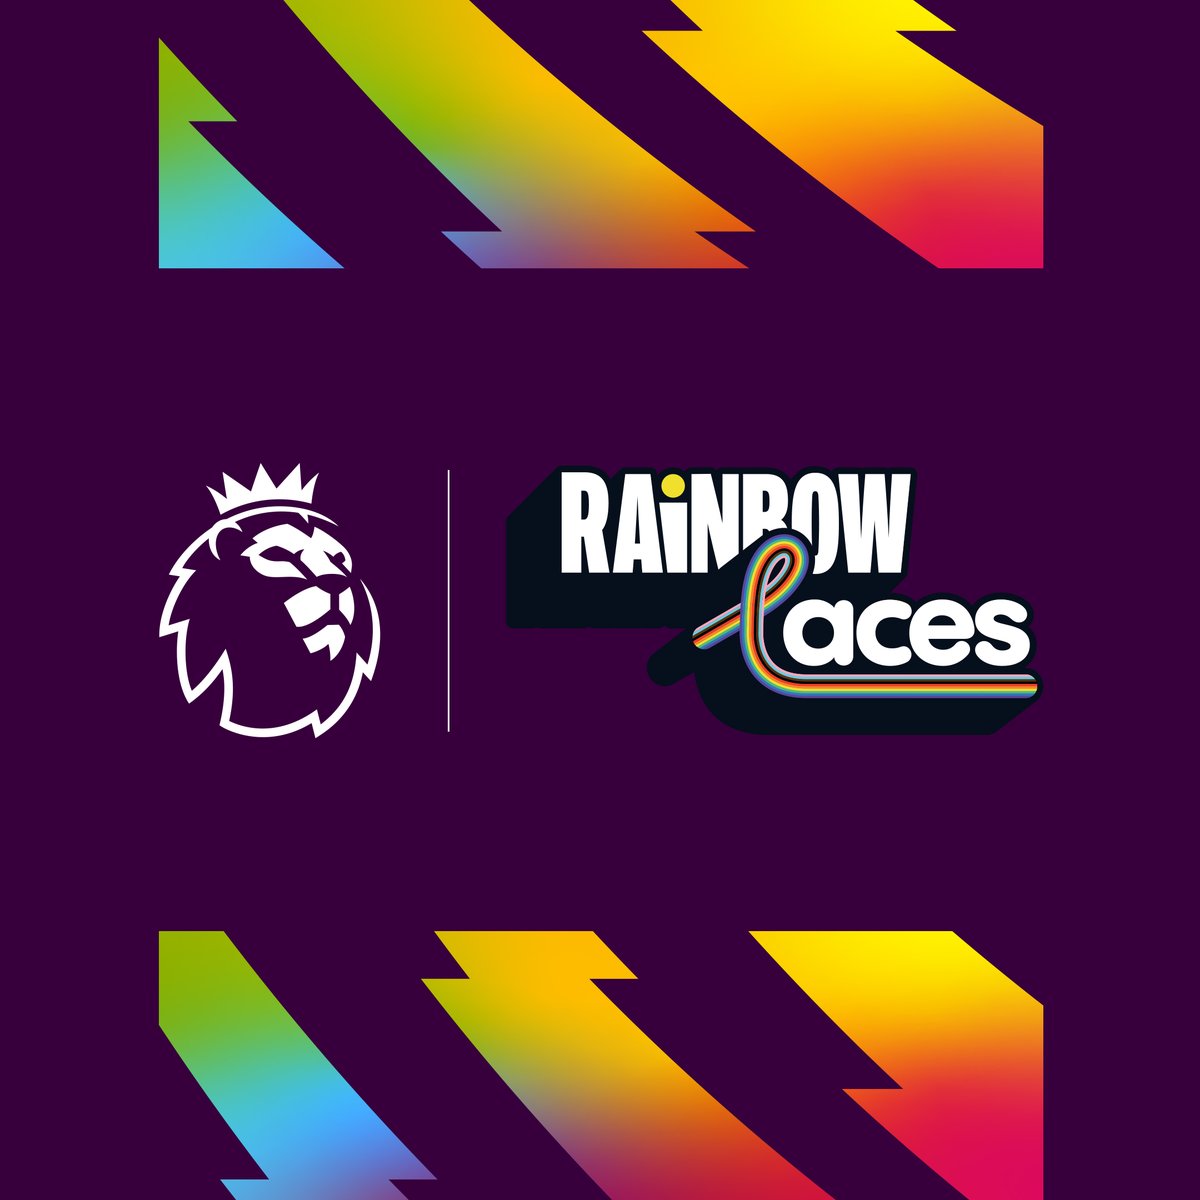 We are proud to celebrate Stonewall's Rainbow Laces campaign 🏳️‍🌈

The #PL and…